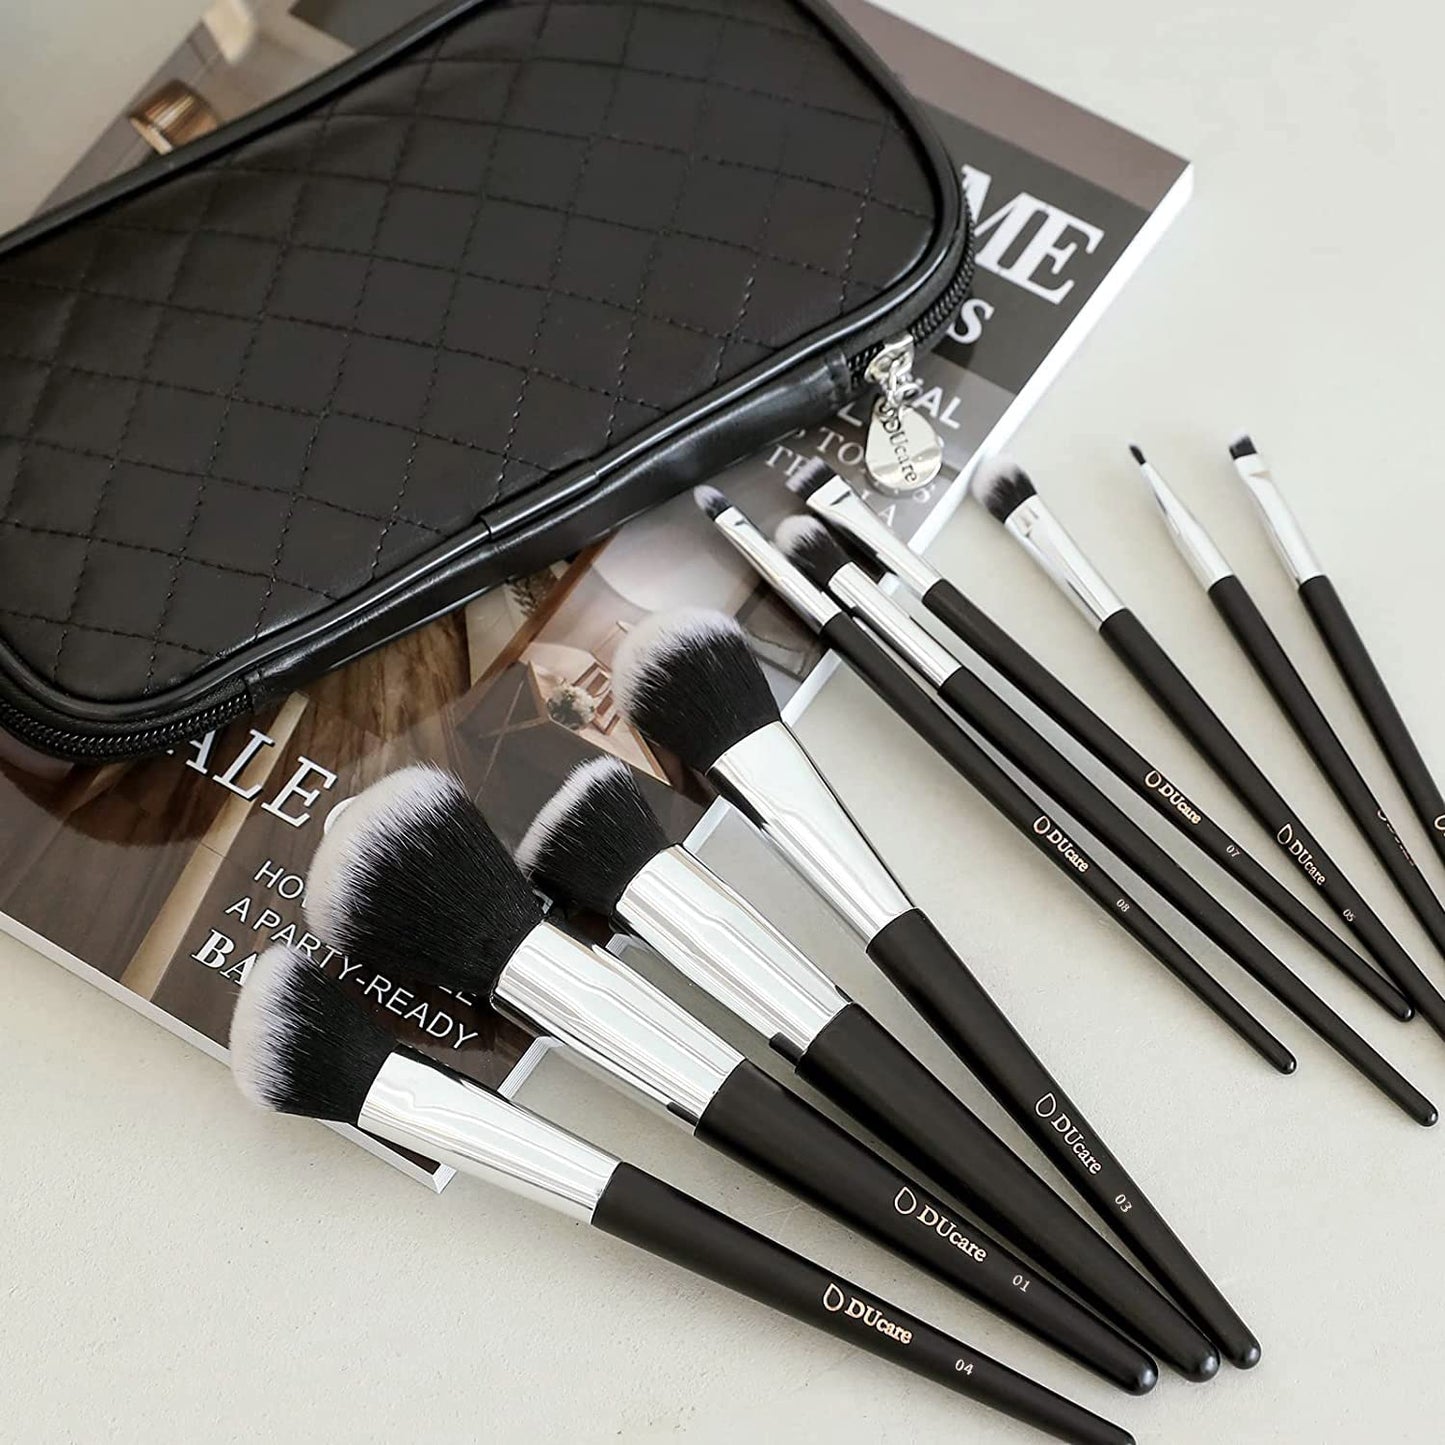 10-Piece Travel Makeup Brush Set with Case - Premium Synthetic Kabuki Brushes for Women - Ideal Gift